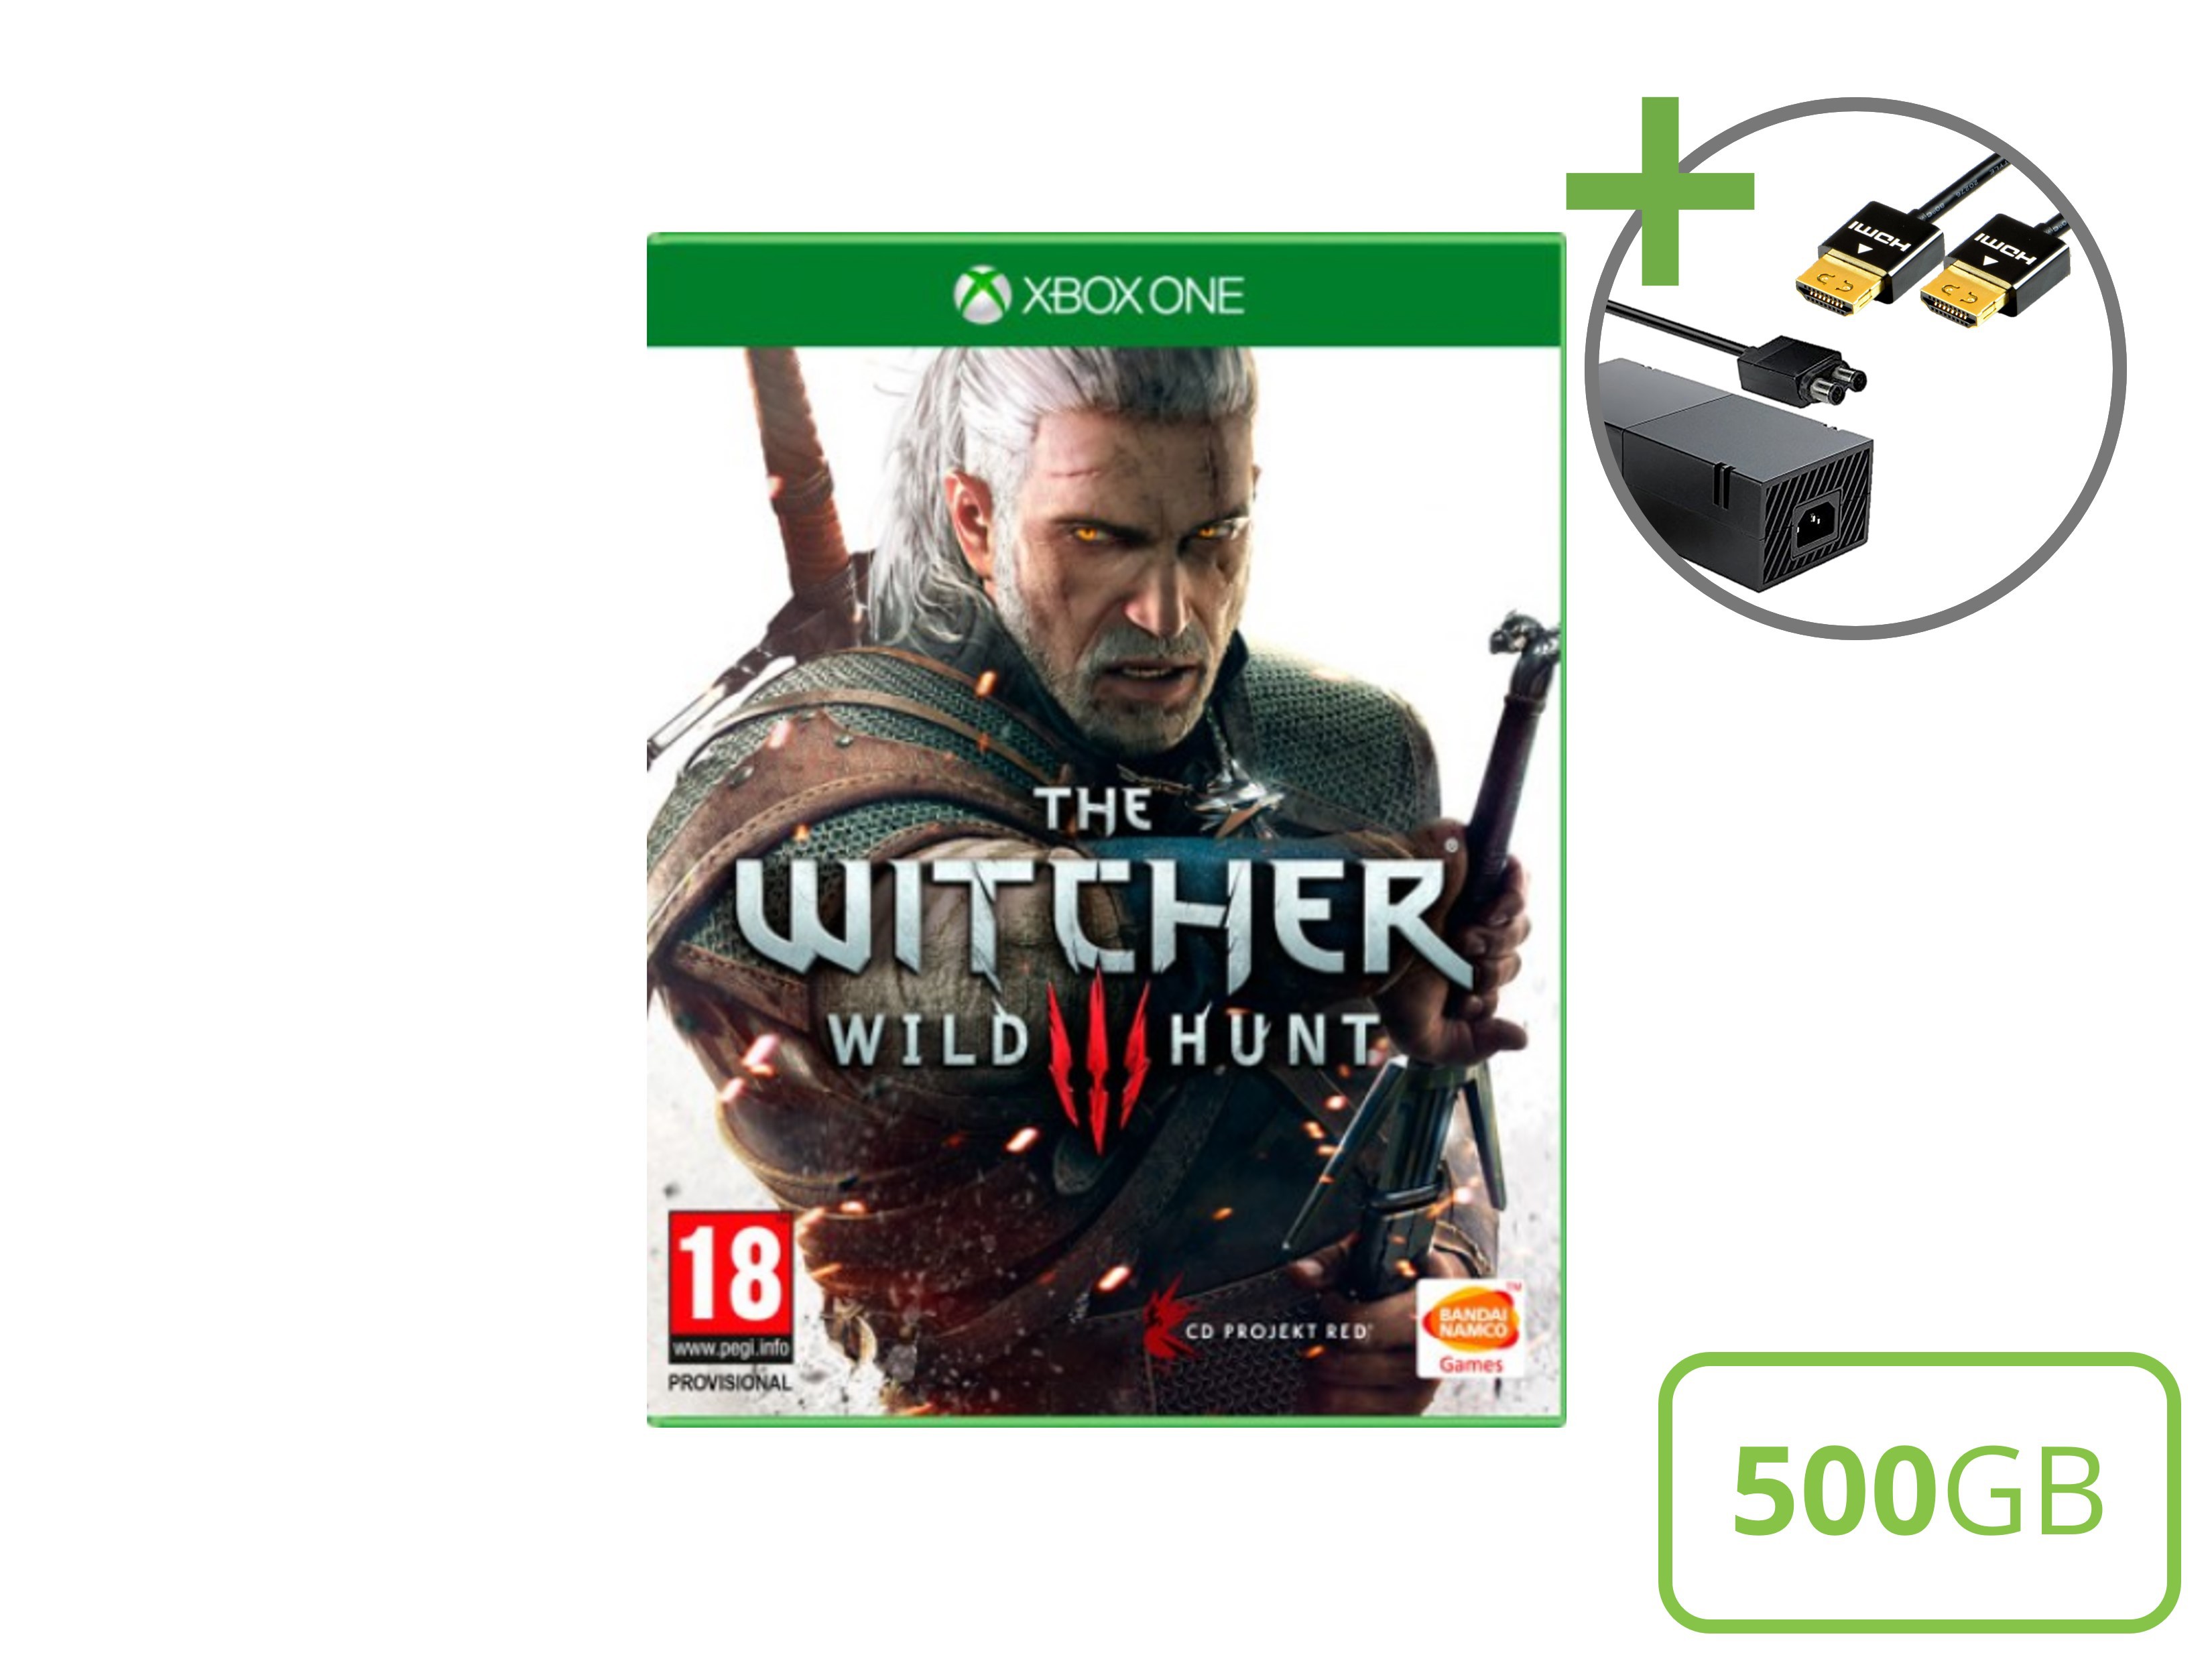 Microsoft Xbox One Starter Pack - 500GB The Witcher 3 Wild Hunt Edition - Xbox One Hardware - 4